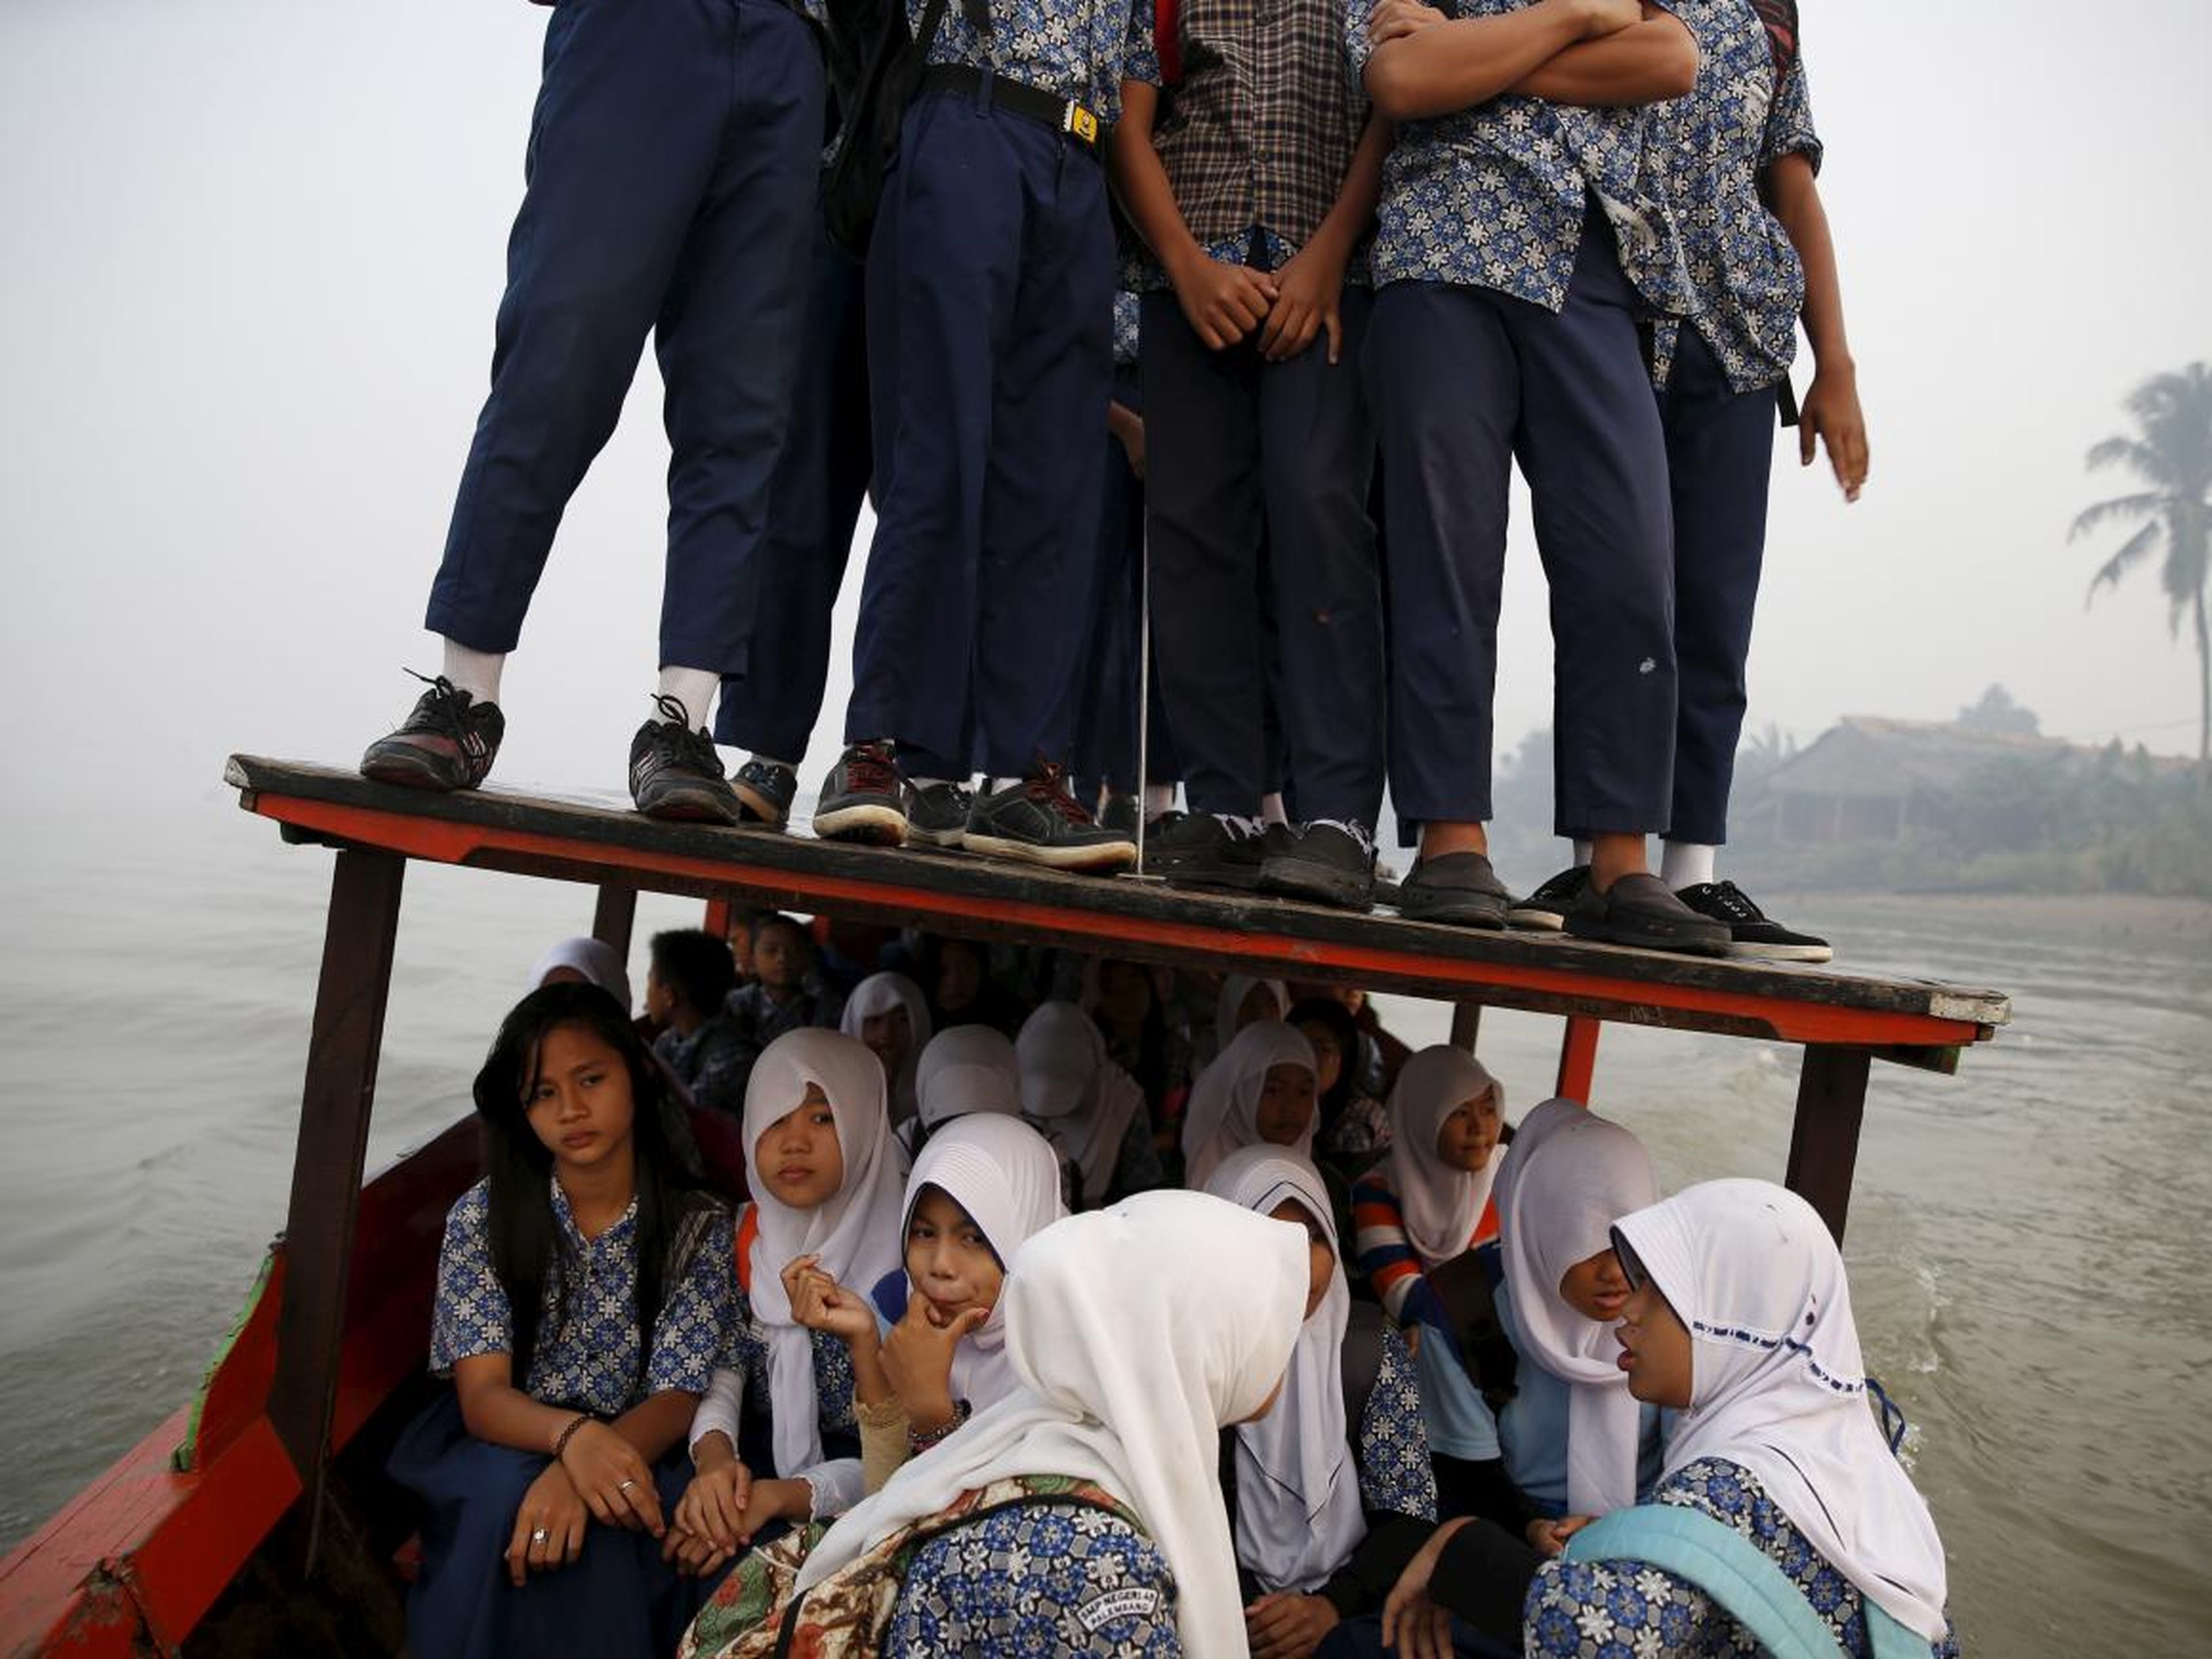 In other parts of the country, the wooden boats that ferry kids across the Musi River sometimes fill up to the extent kids must stand on the roof.